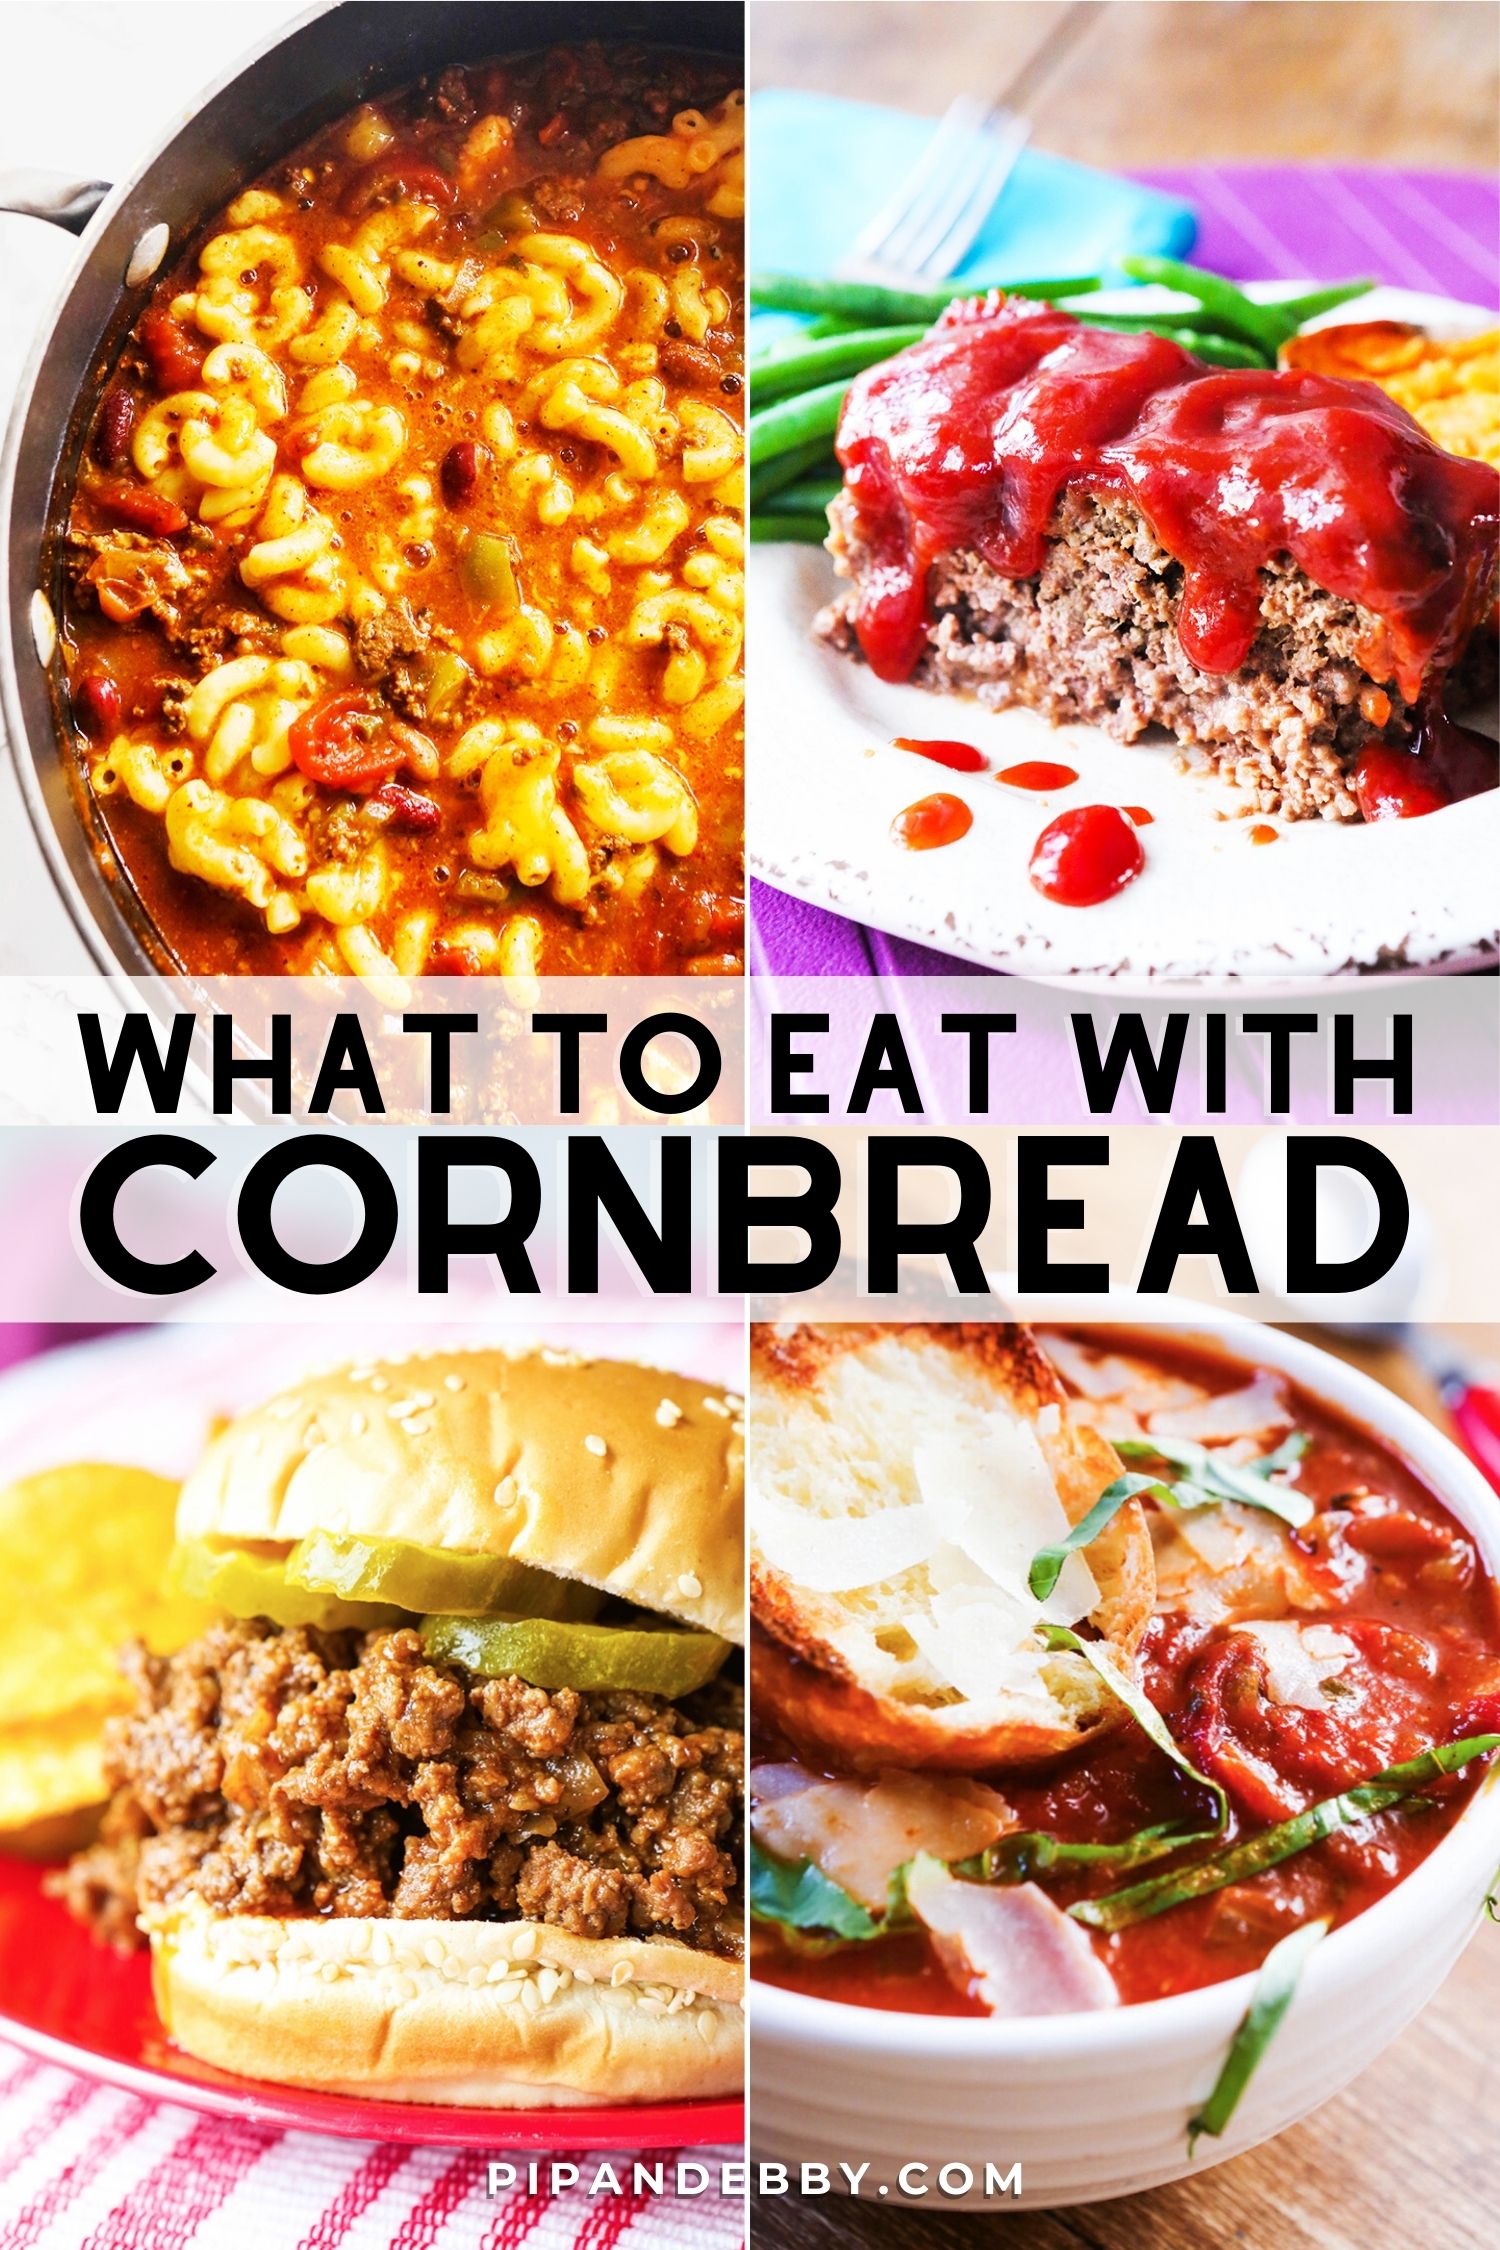 Four food photos in a grid with text overlay reading, "What to eat with cornbread."